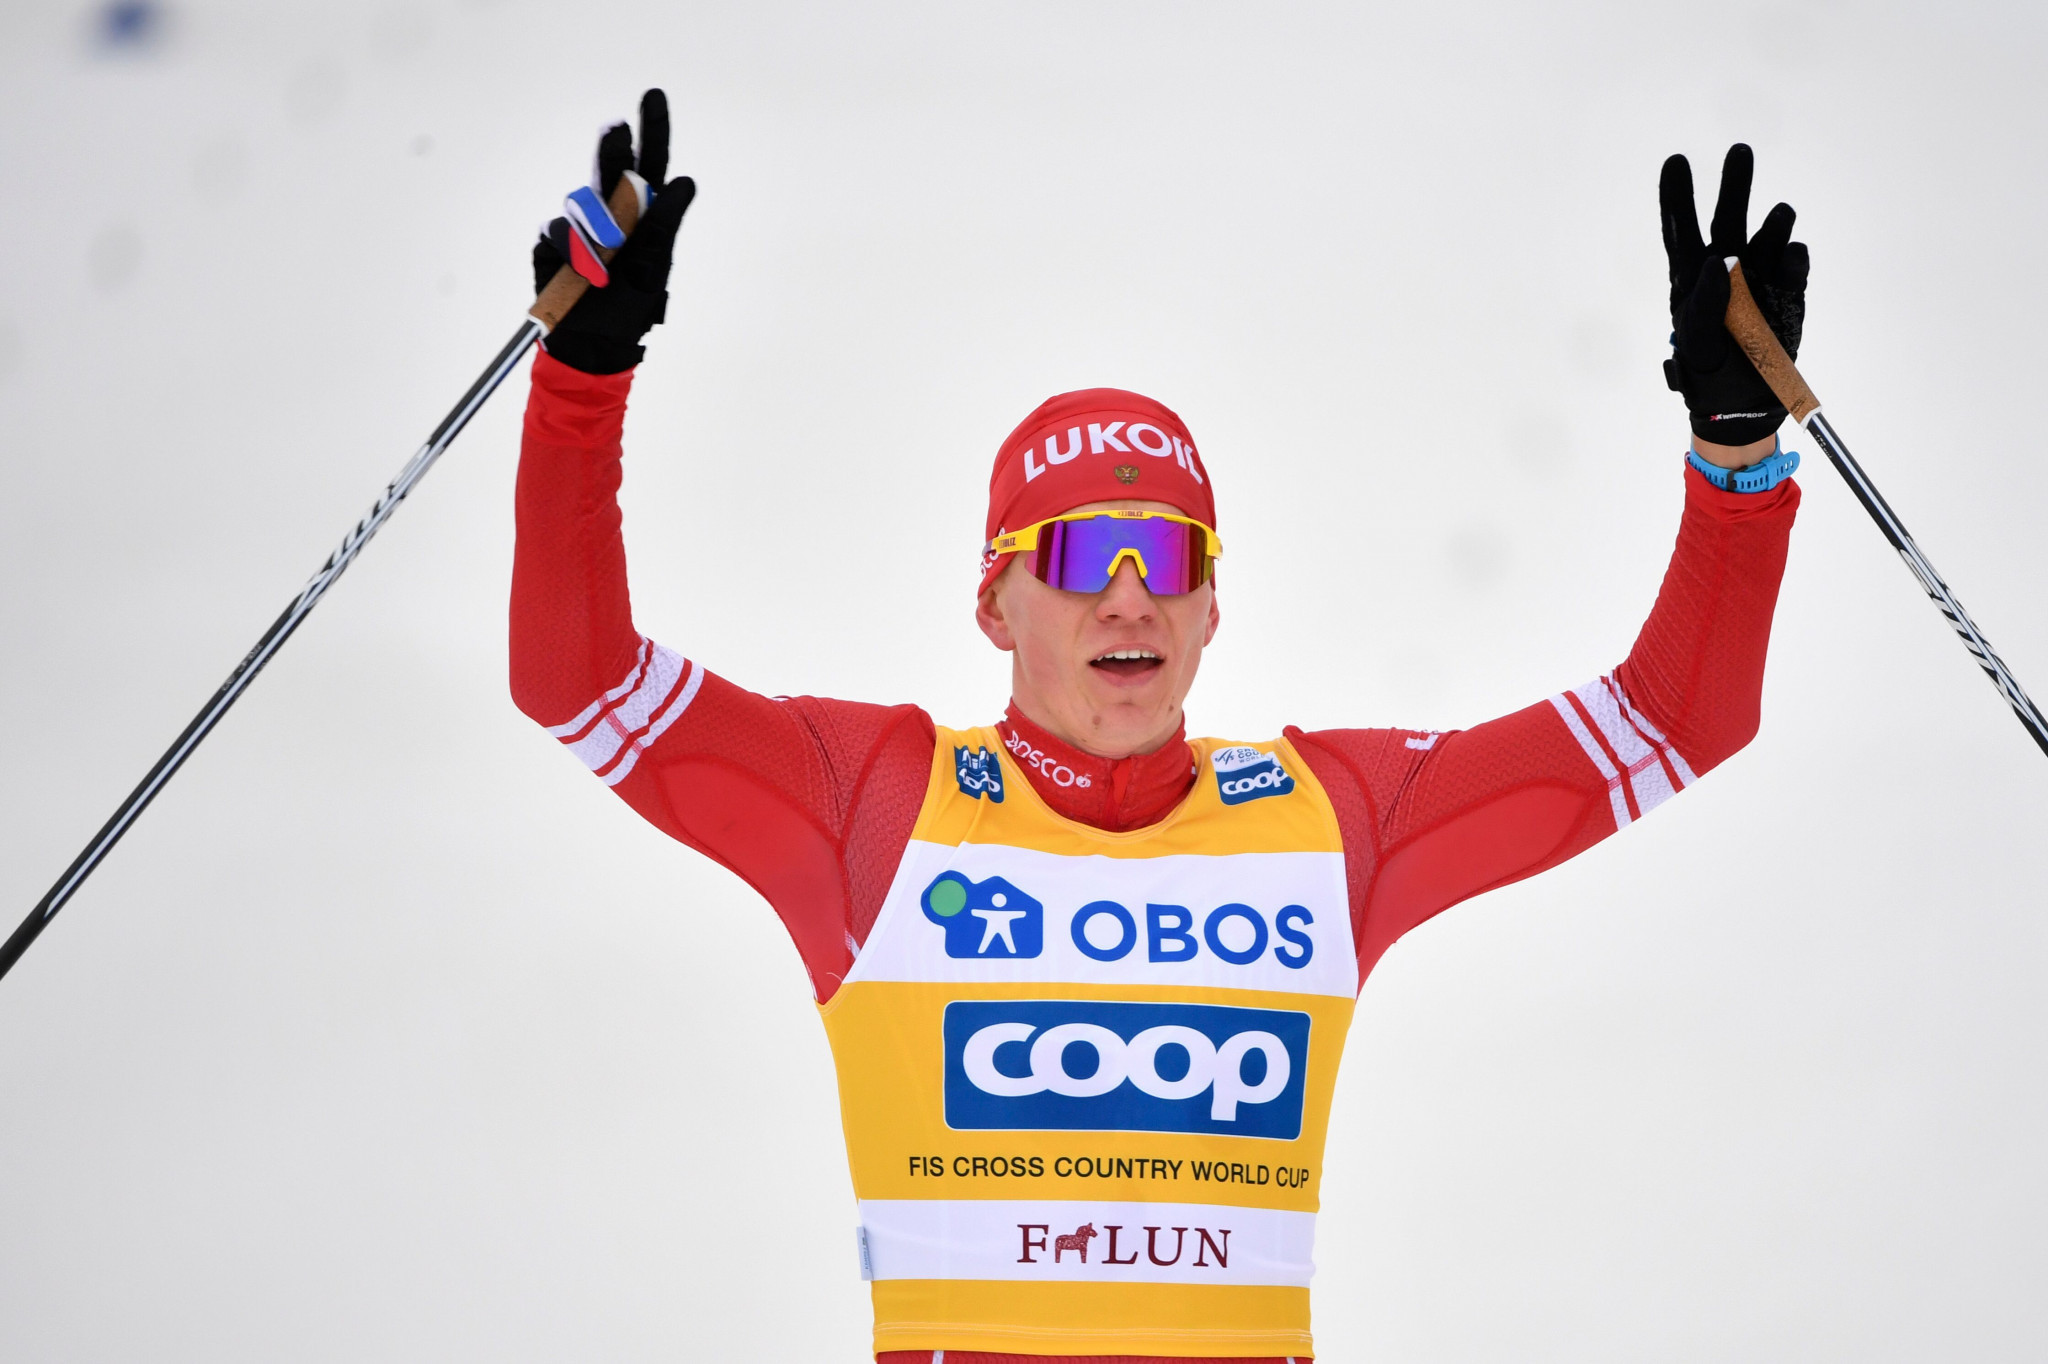 Russia's Alexander Bolshunov has held off a strong Norwegian contingent this season ©Getty Images